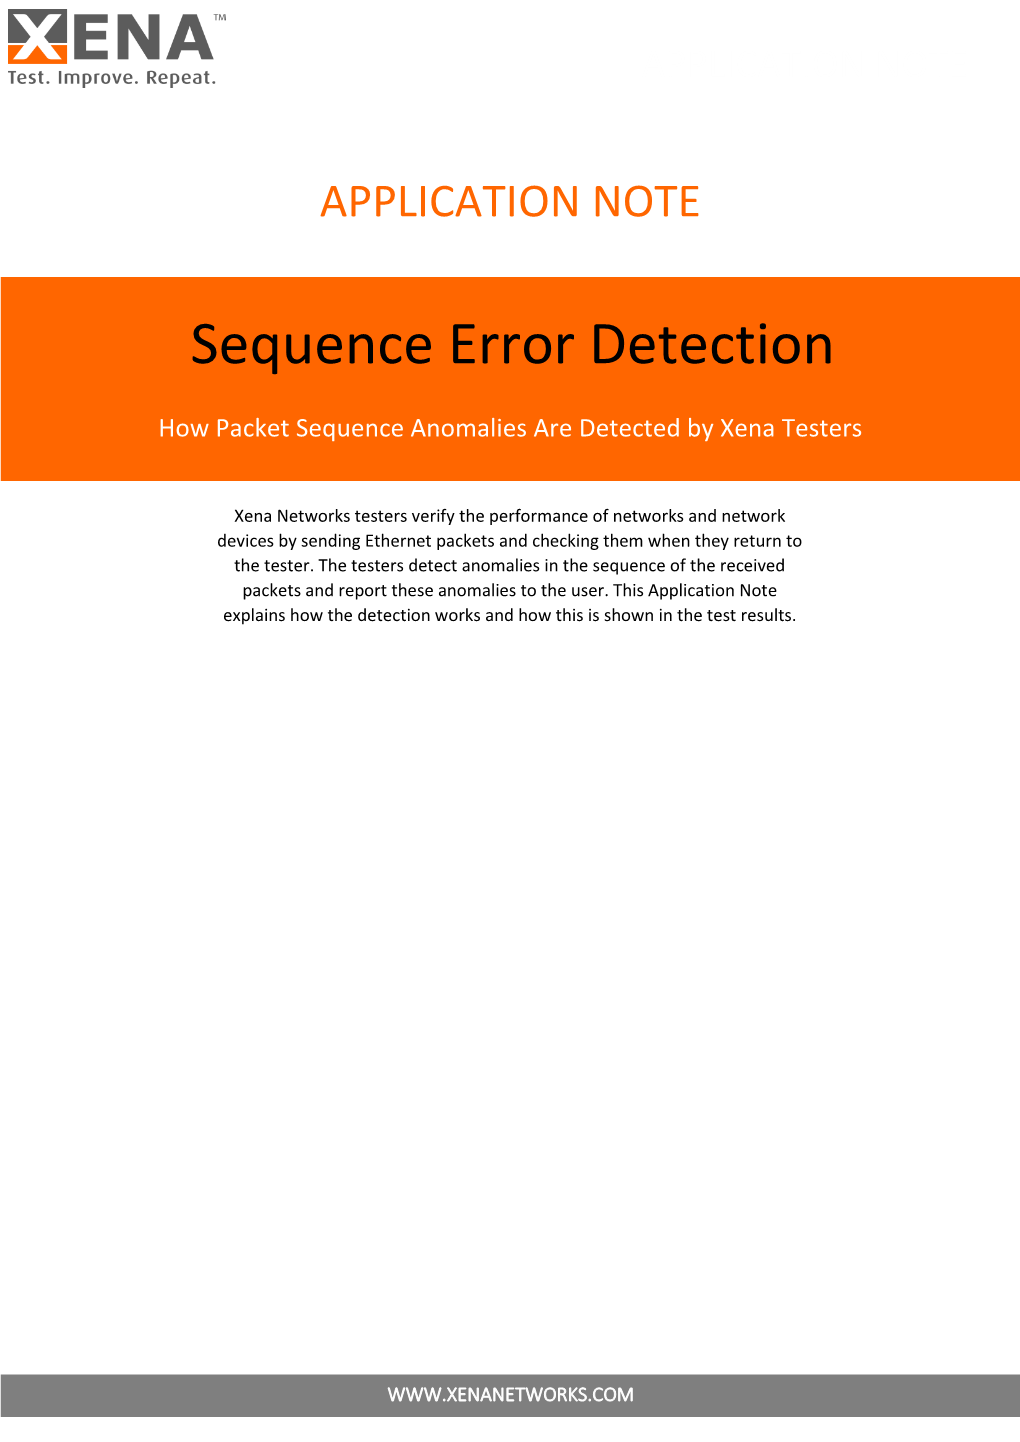 Sequence Error Detection